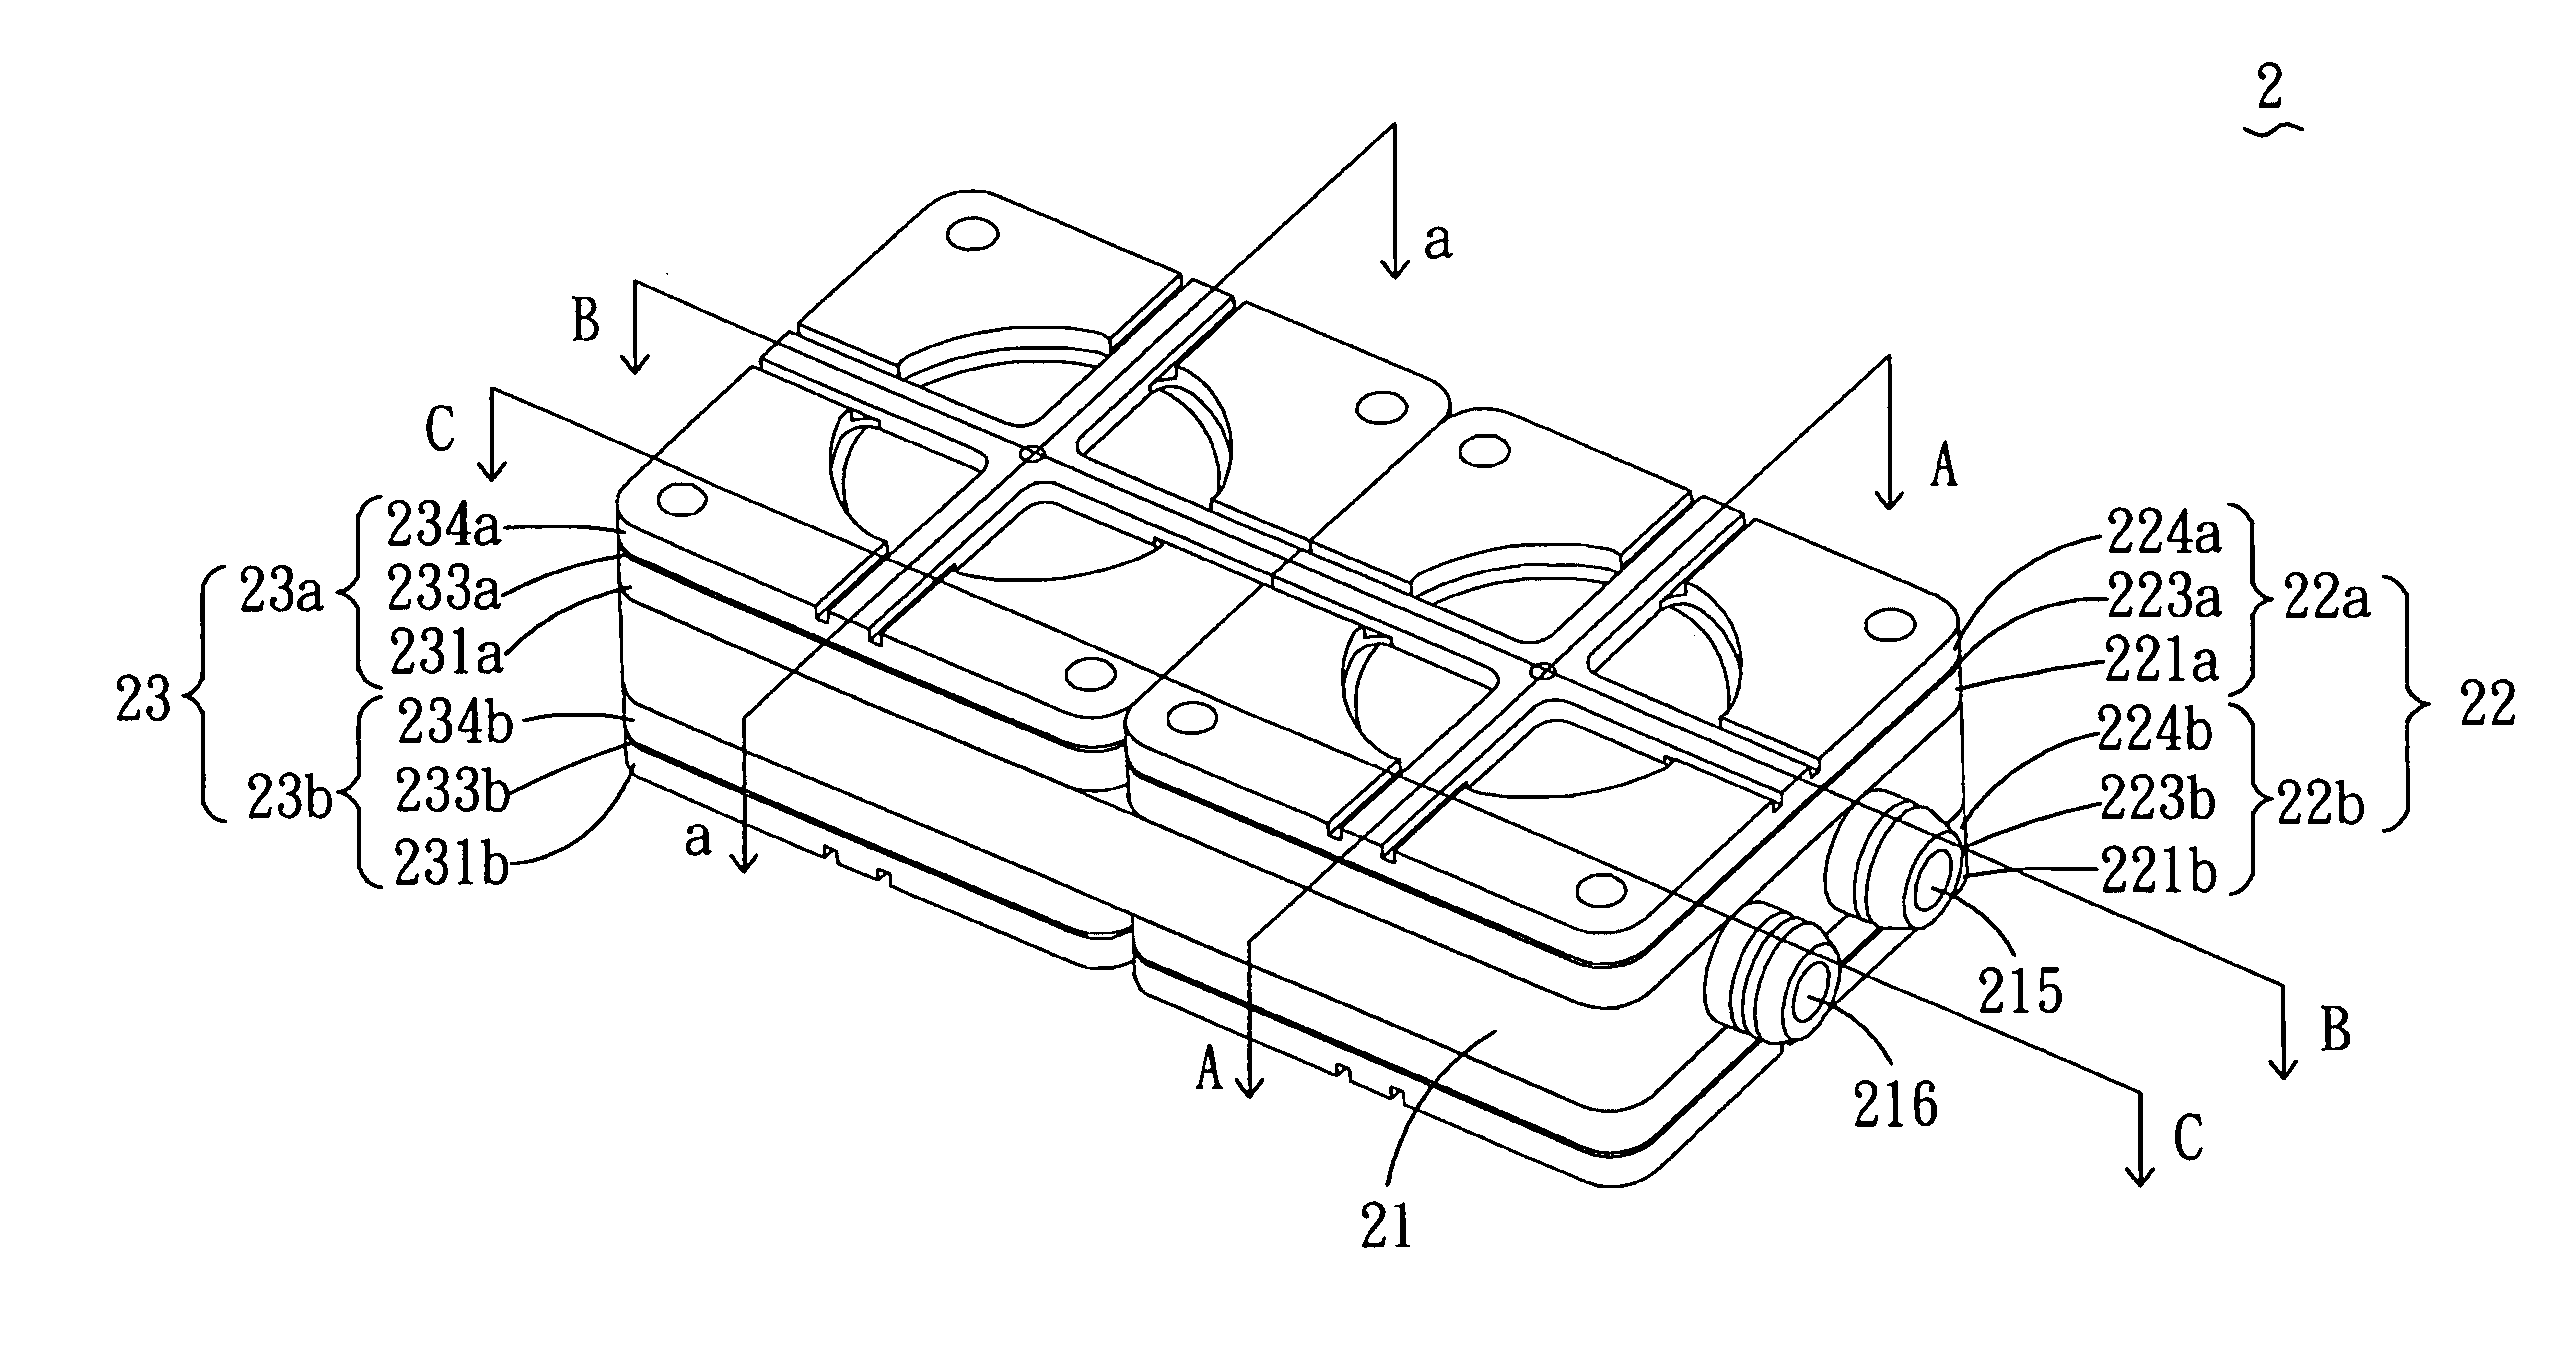 Fluid transportation device having multiple double-chamber actuating structrures